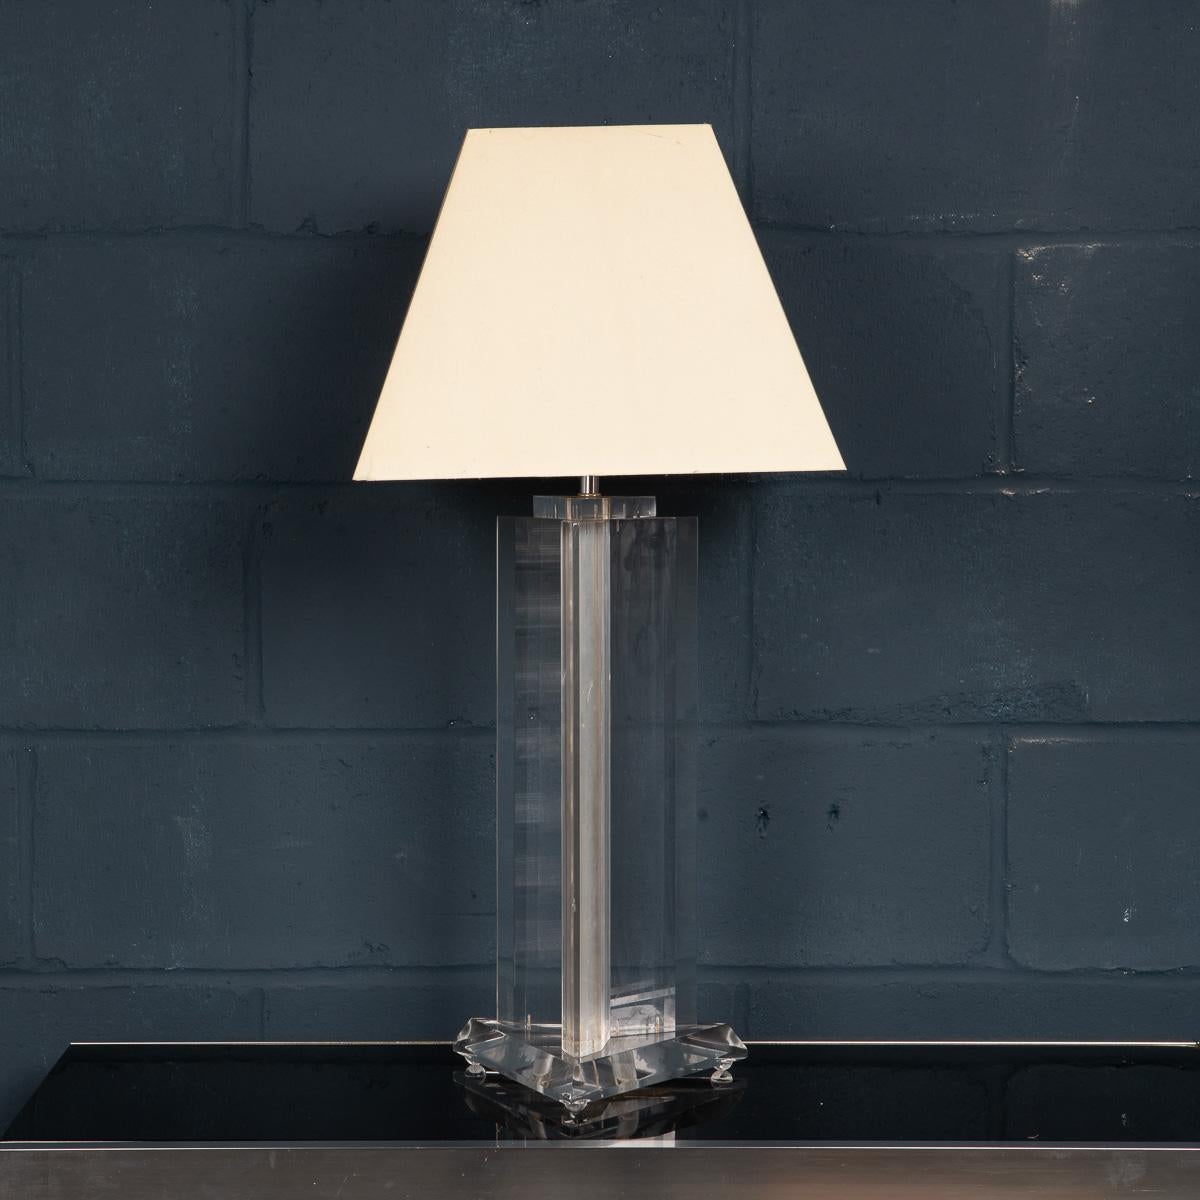 20th Century American Made Lucite Table Lamps In Good Condition For Sale In Royal Tunbridge Wells, Kent